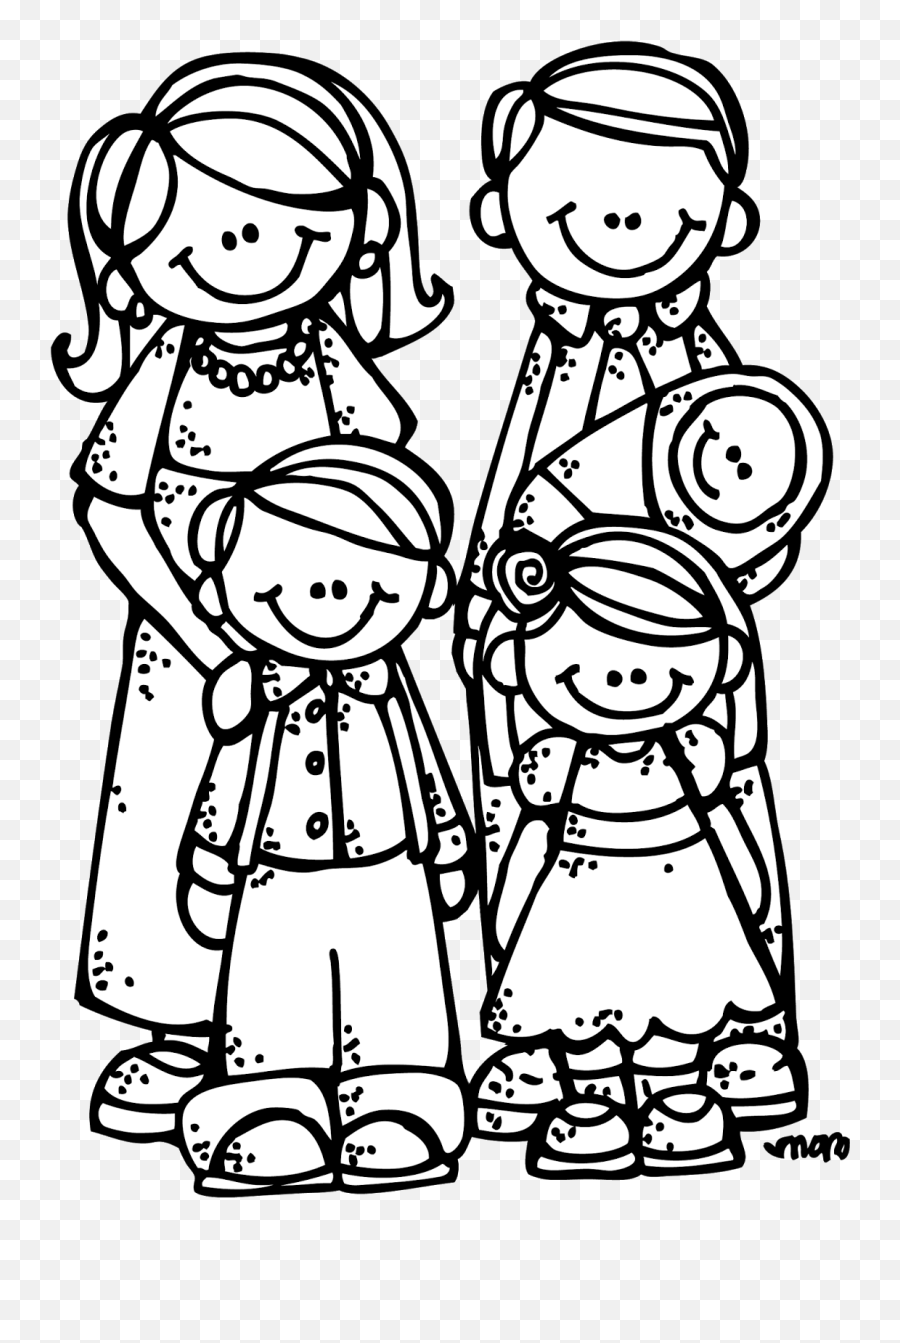 Lds Family Clipart Black And White - Family Clipart Black And White Emoji,Black Family Emoji